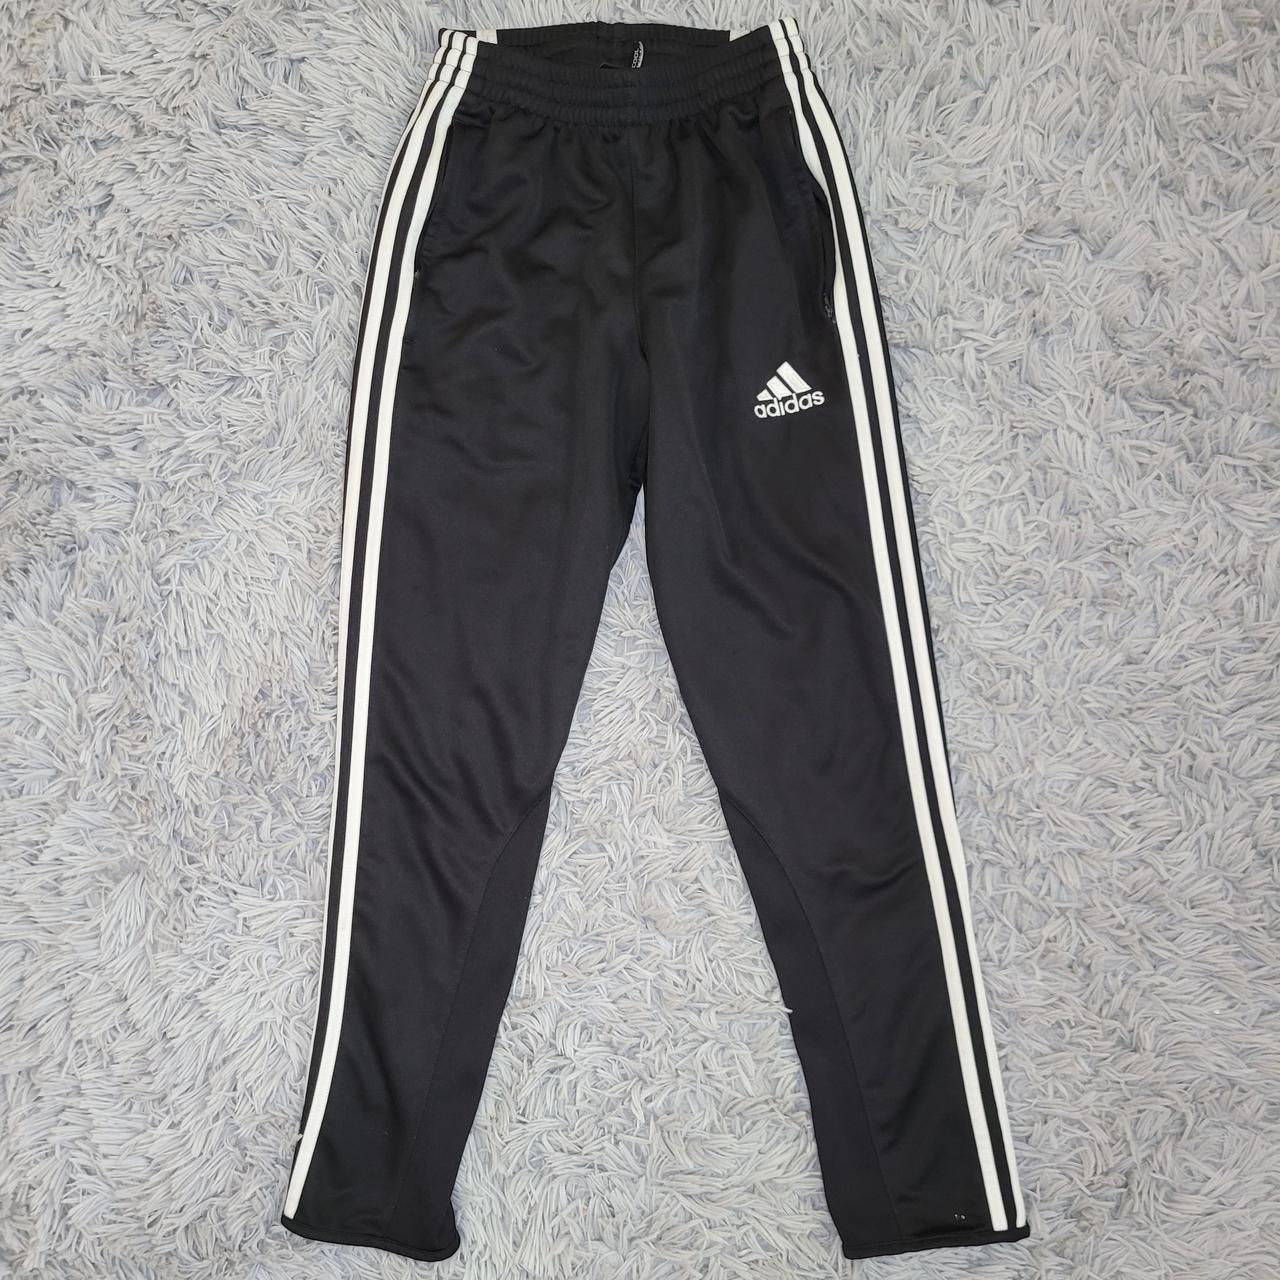 Women's Black and White Joggers-tracksuits (2)